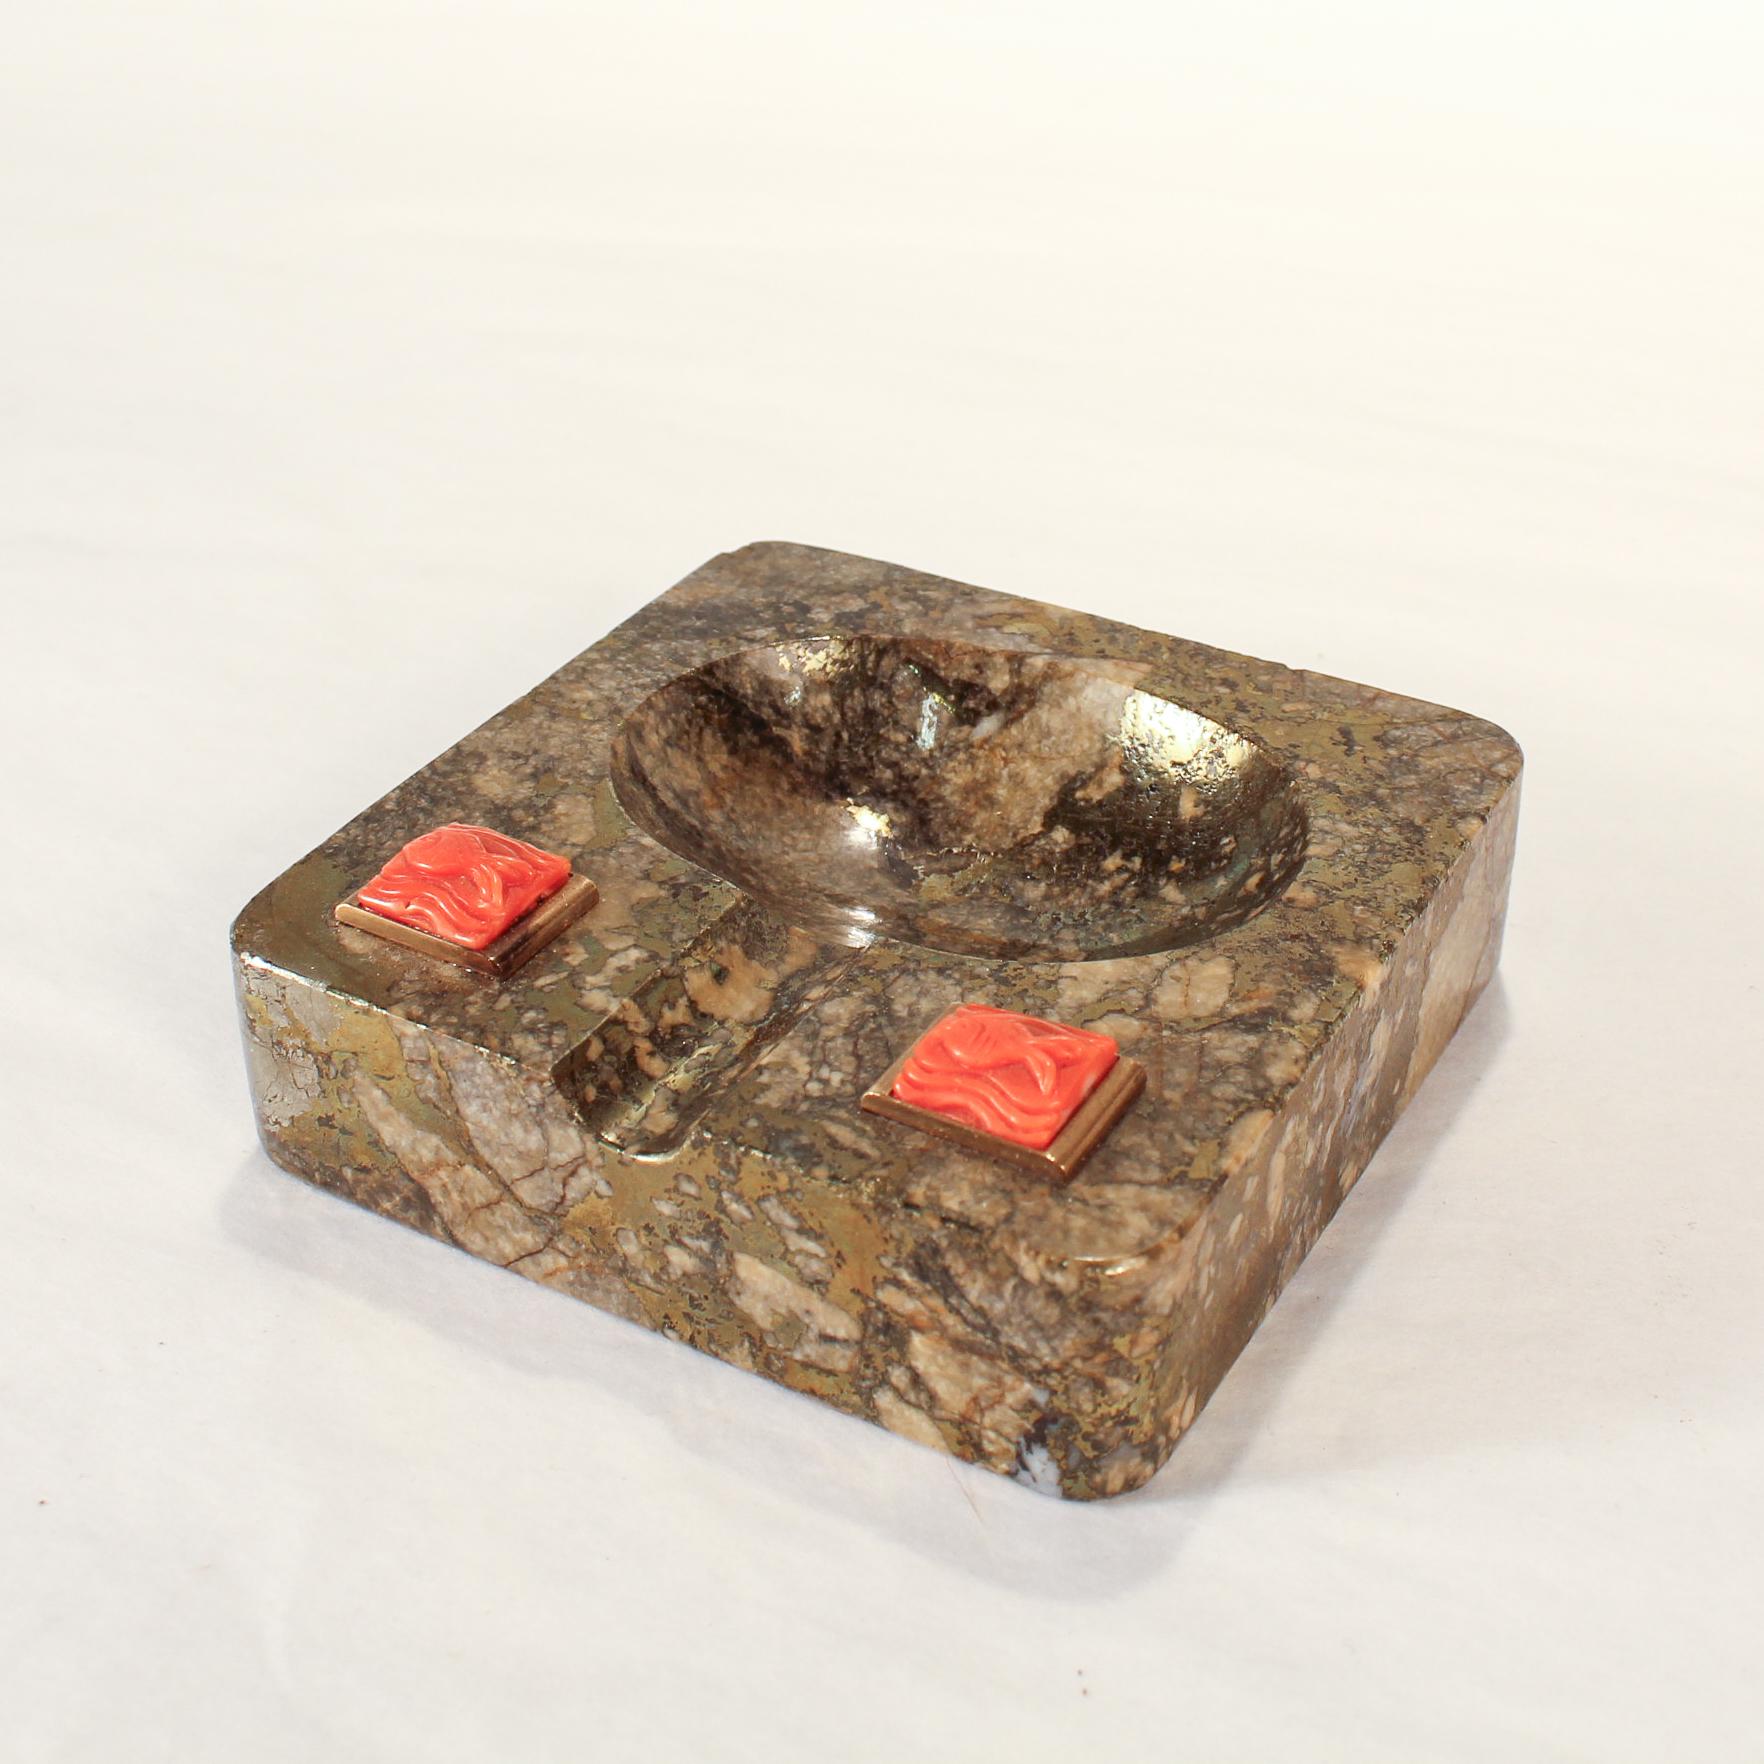 A fine antique Art Deco pyrite hardstone & coral ashtray.

With two coral plaques each having a carved fish. 

This piece feels as if it belongs in 1930's Havana or Miami.

Simply an amazing Art Deco artifact! 

Date:
Early 20th